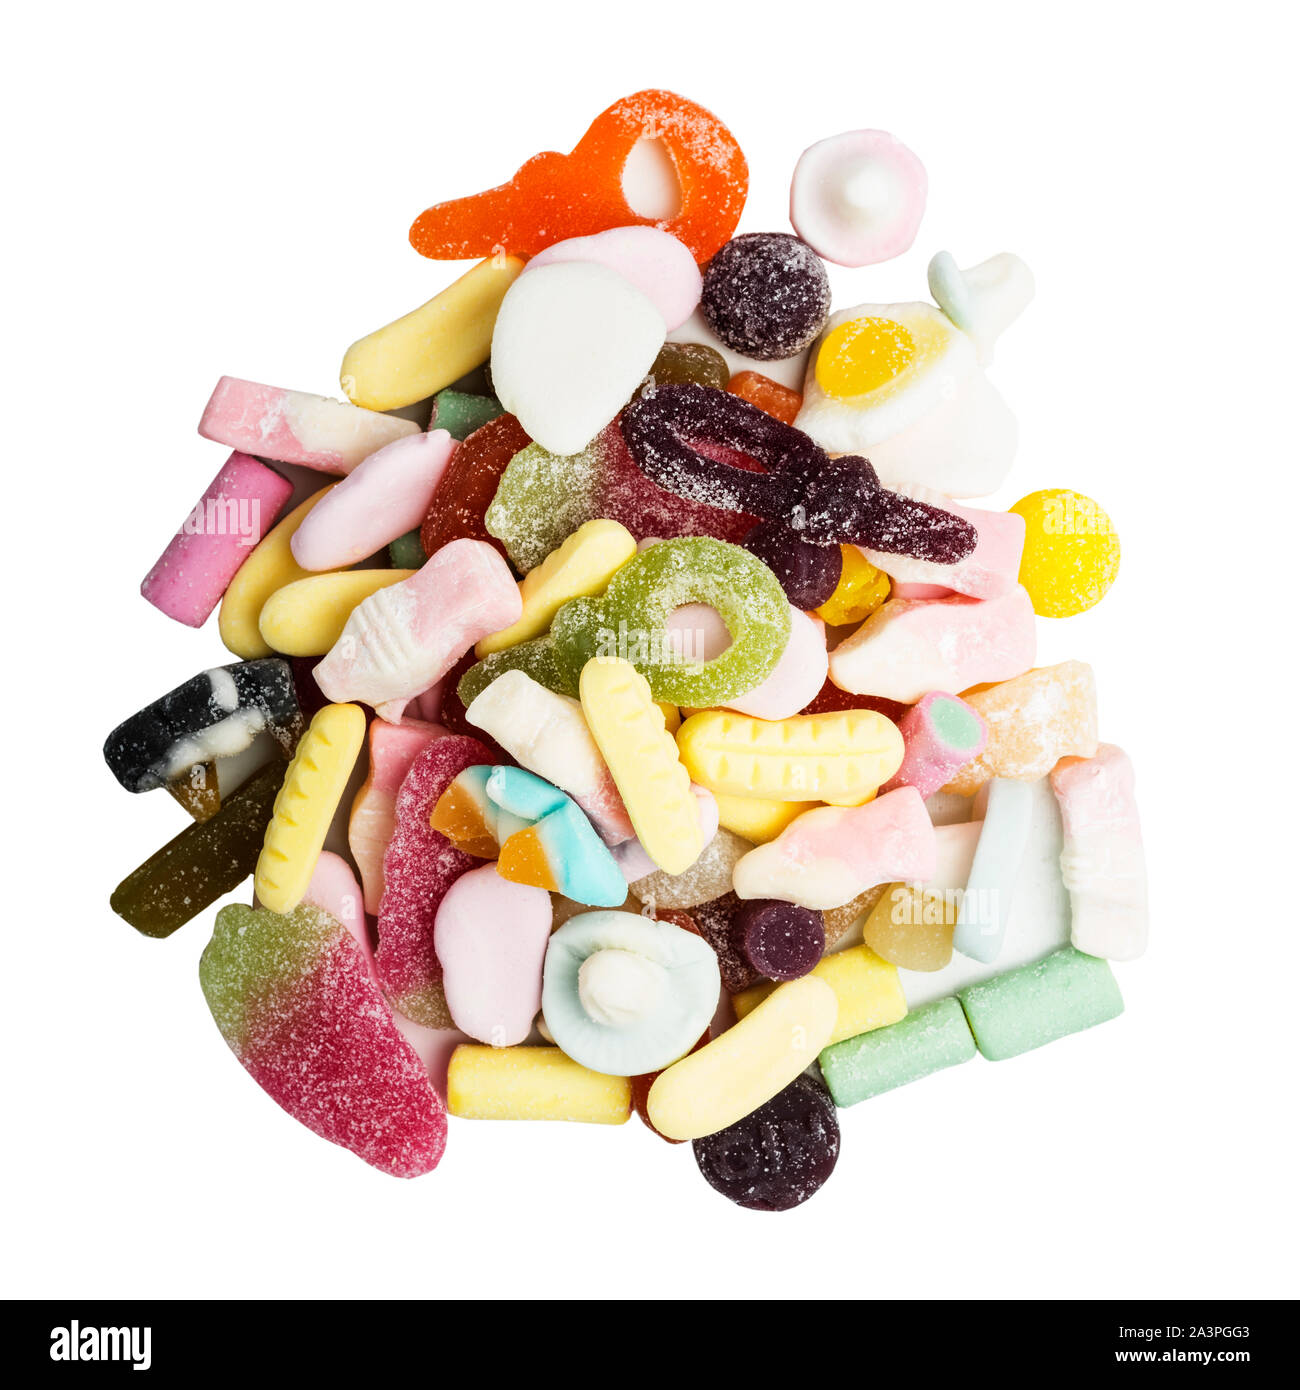 A quarter of sweets on a white background Stock Photo